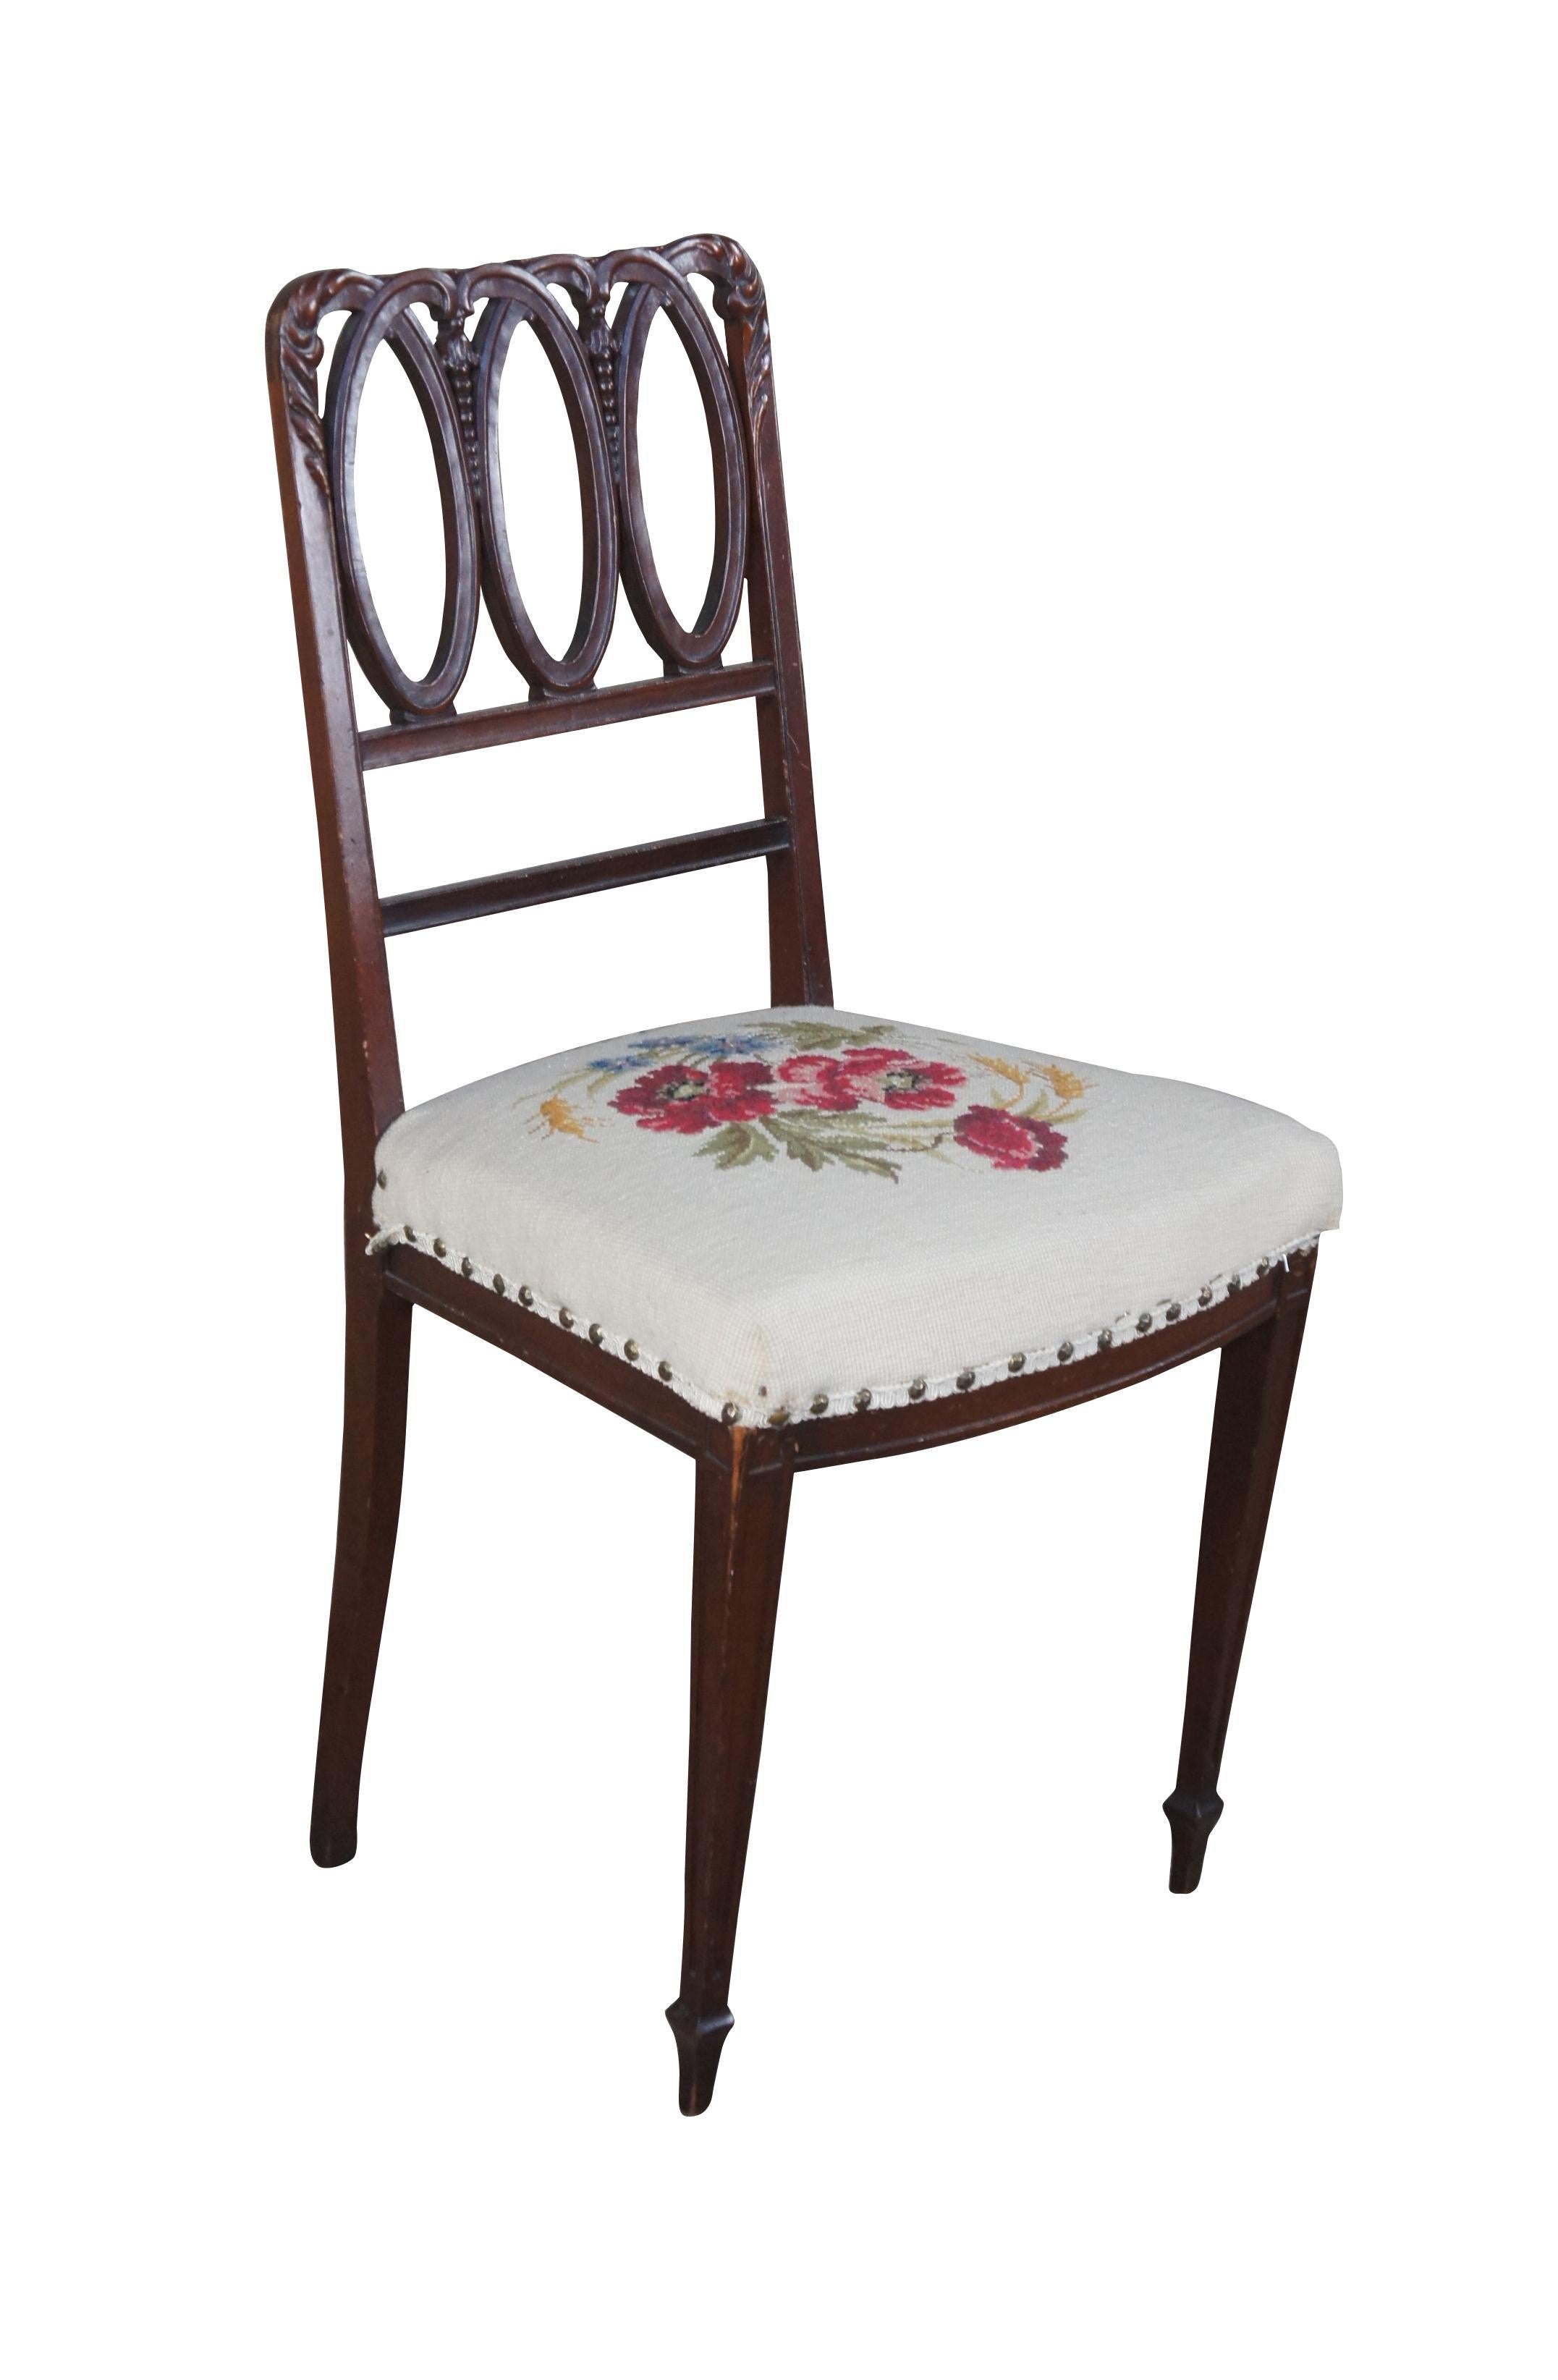 Antique Hepplewhite Hoop Back accent chair.  Made of mahogany featuring pierced reticulated design with floral rose needlepoint seat with nailhead trim over tapered front legs.

Manchester Upholstering Co, Better Grade Furniture, Jamaica New York